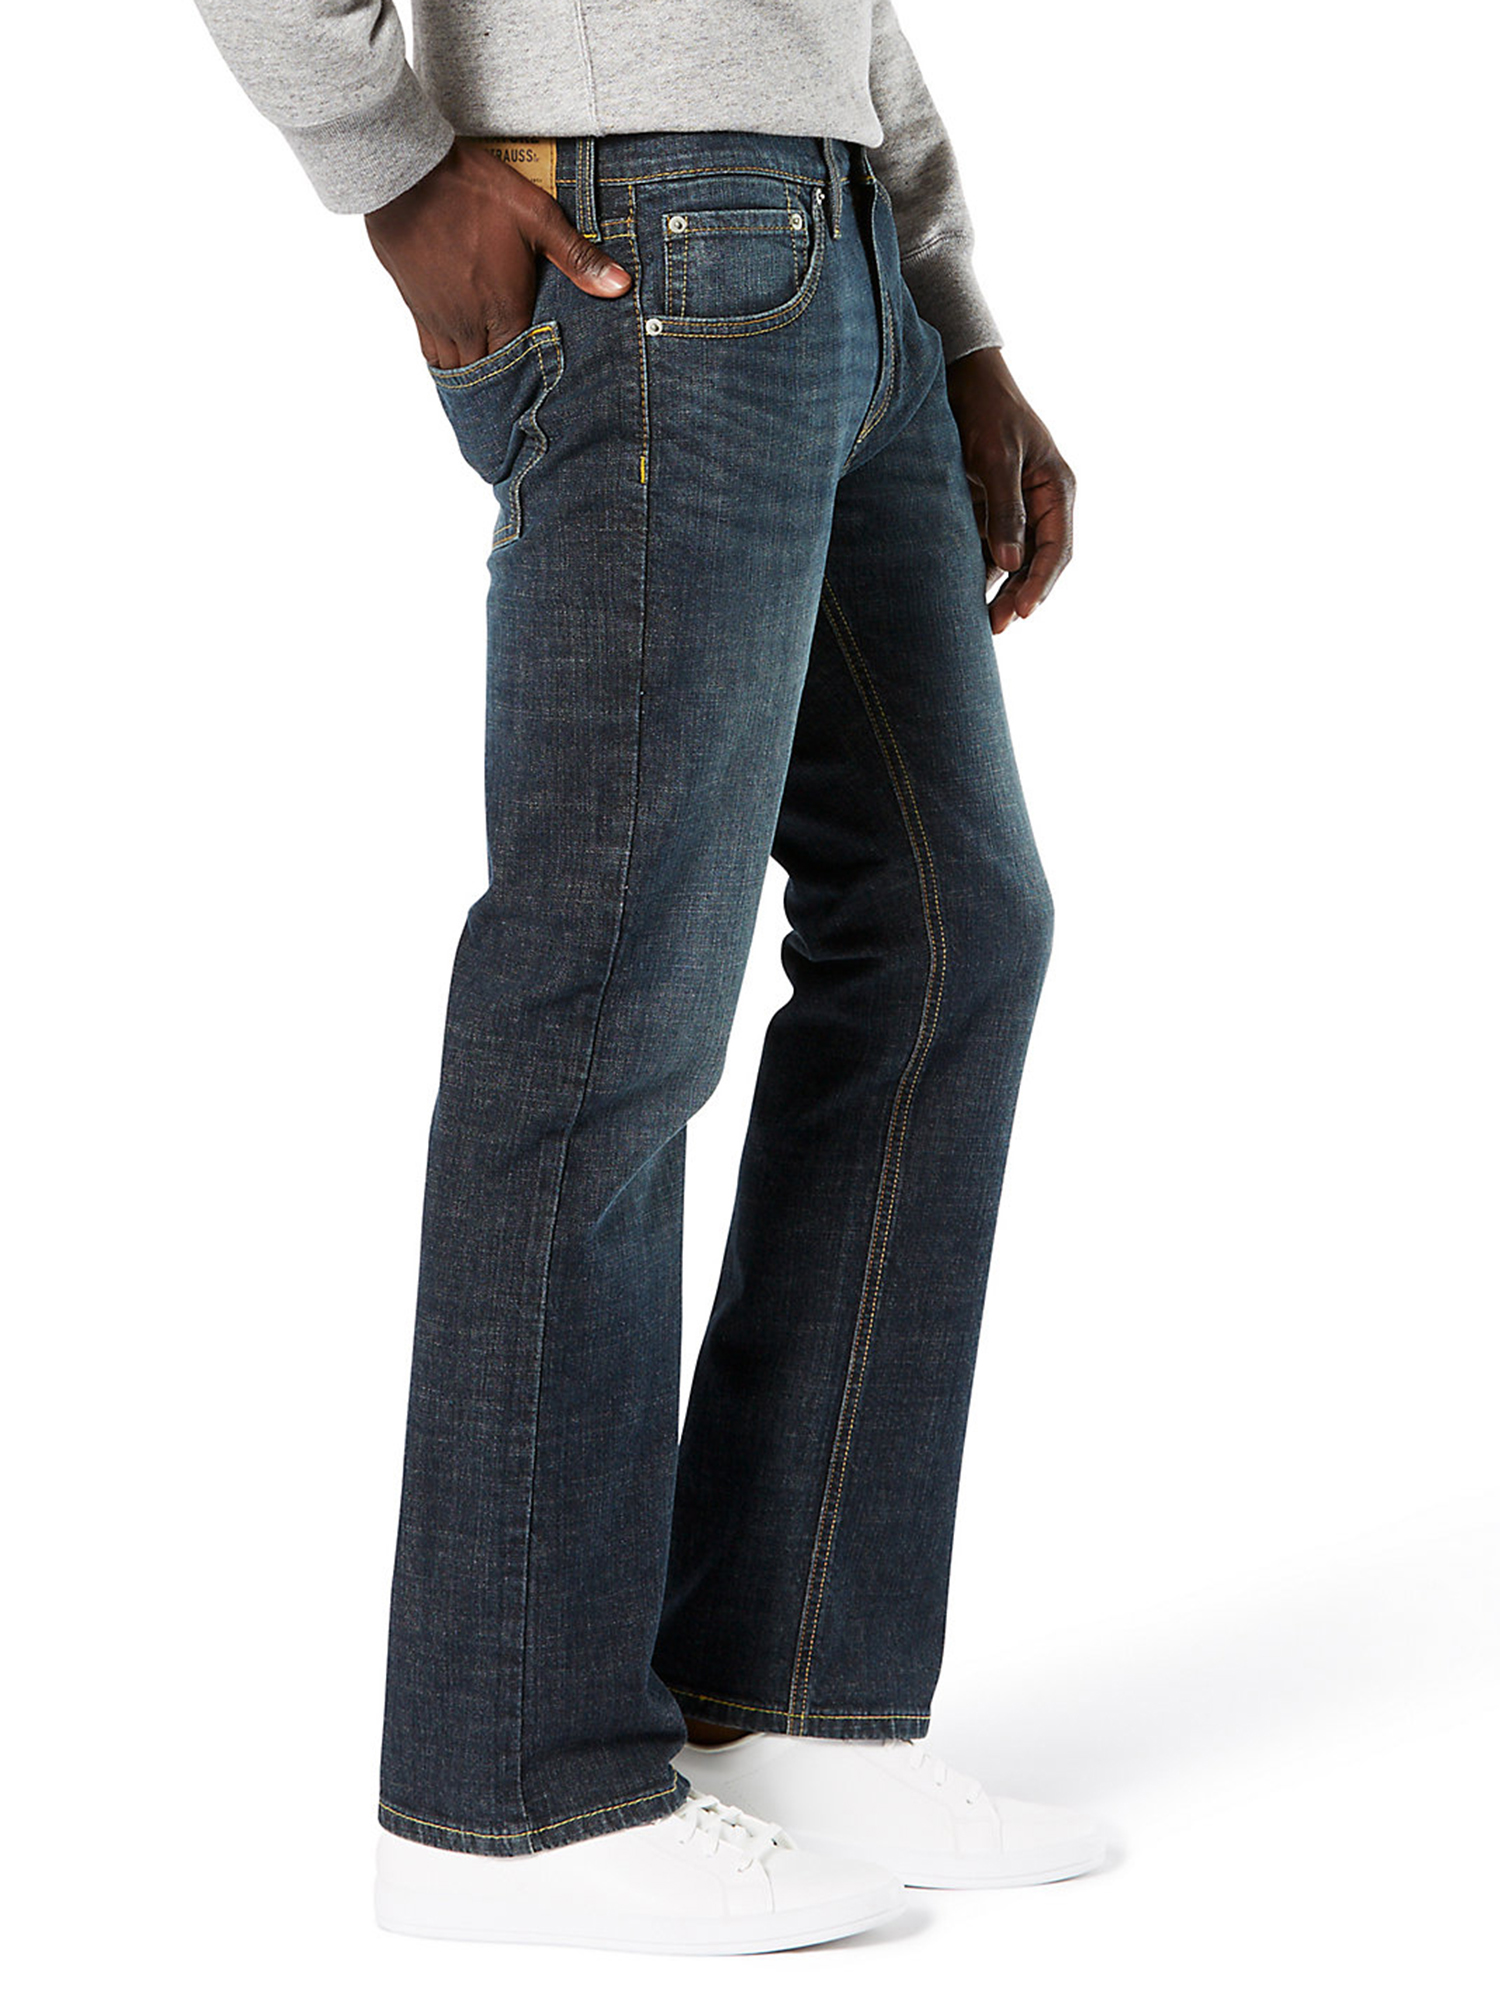 Signature by Levi Strauss & Co. Men's and Big and Tall Bootcut Jeans - image 5 of 10